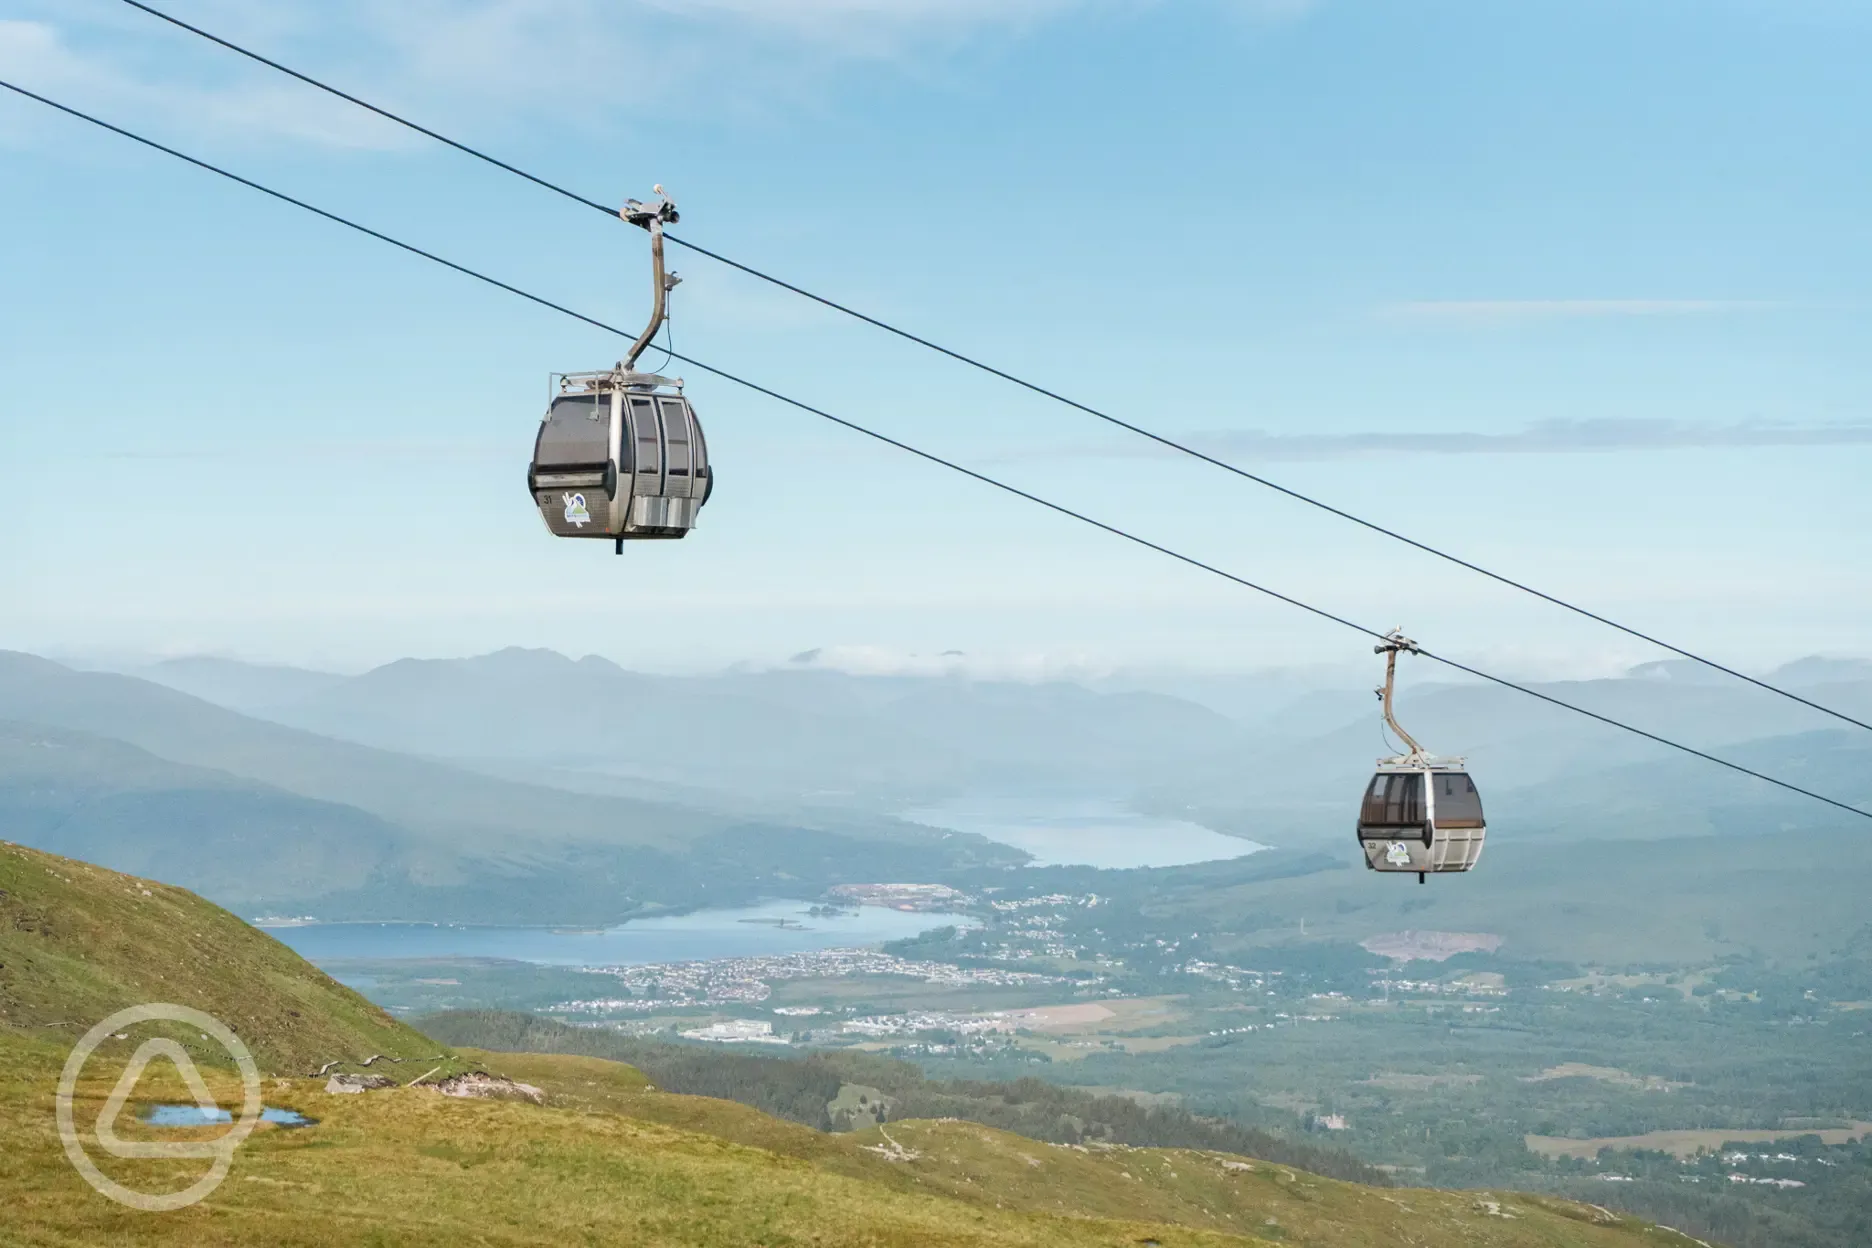 Gondola access from site